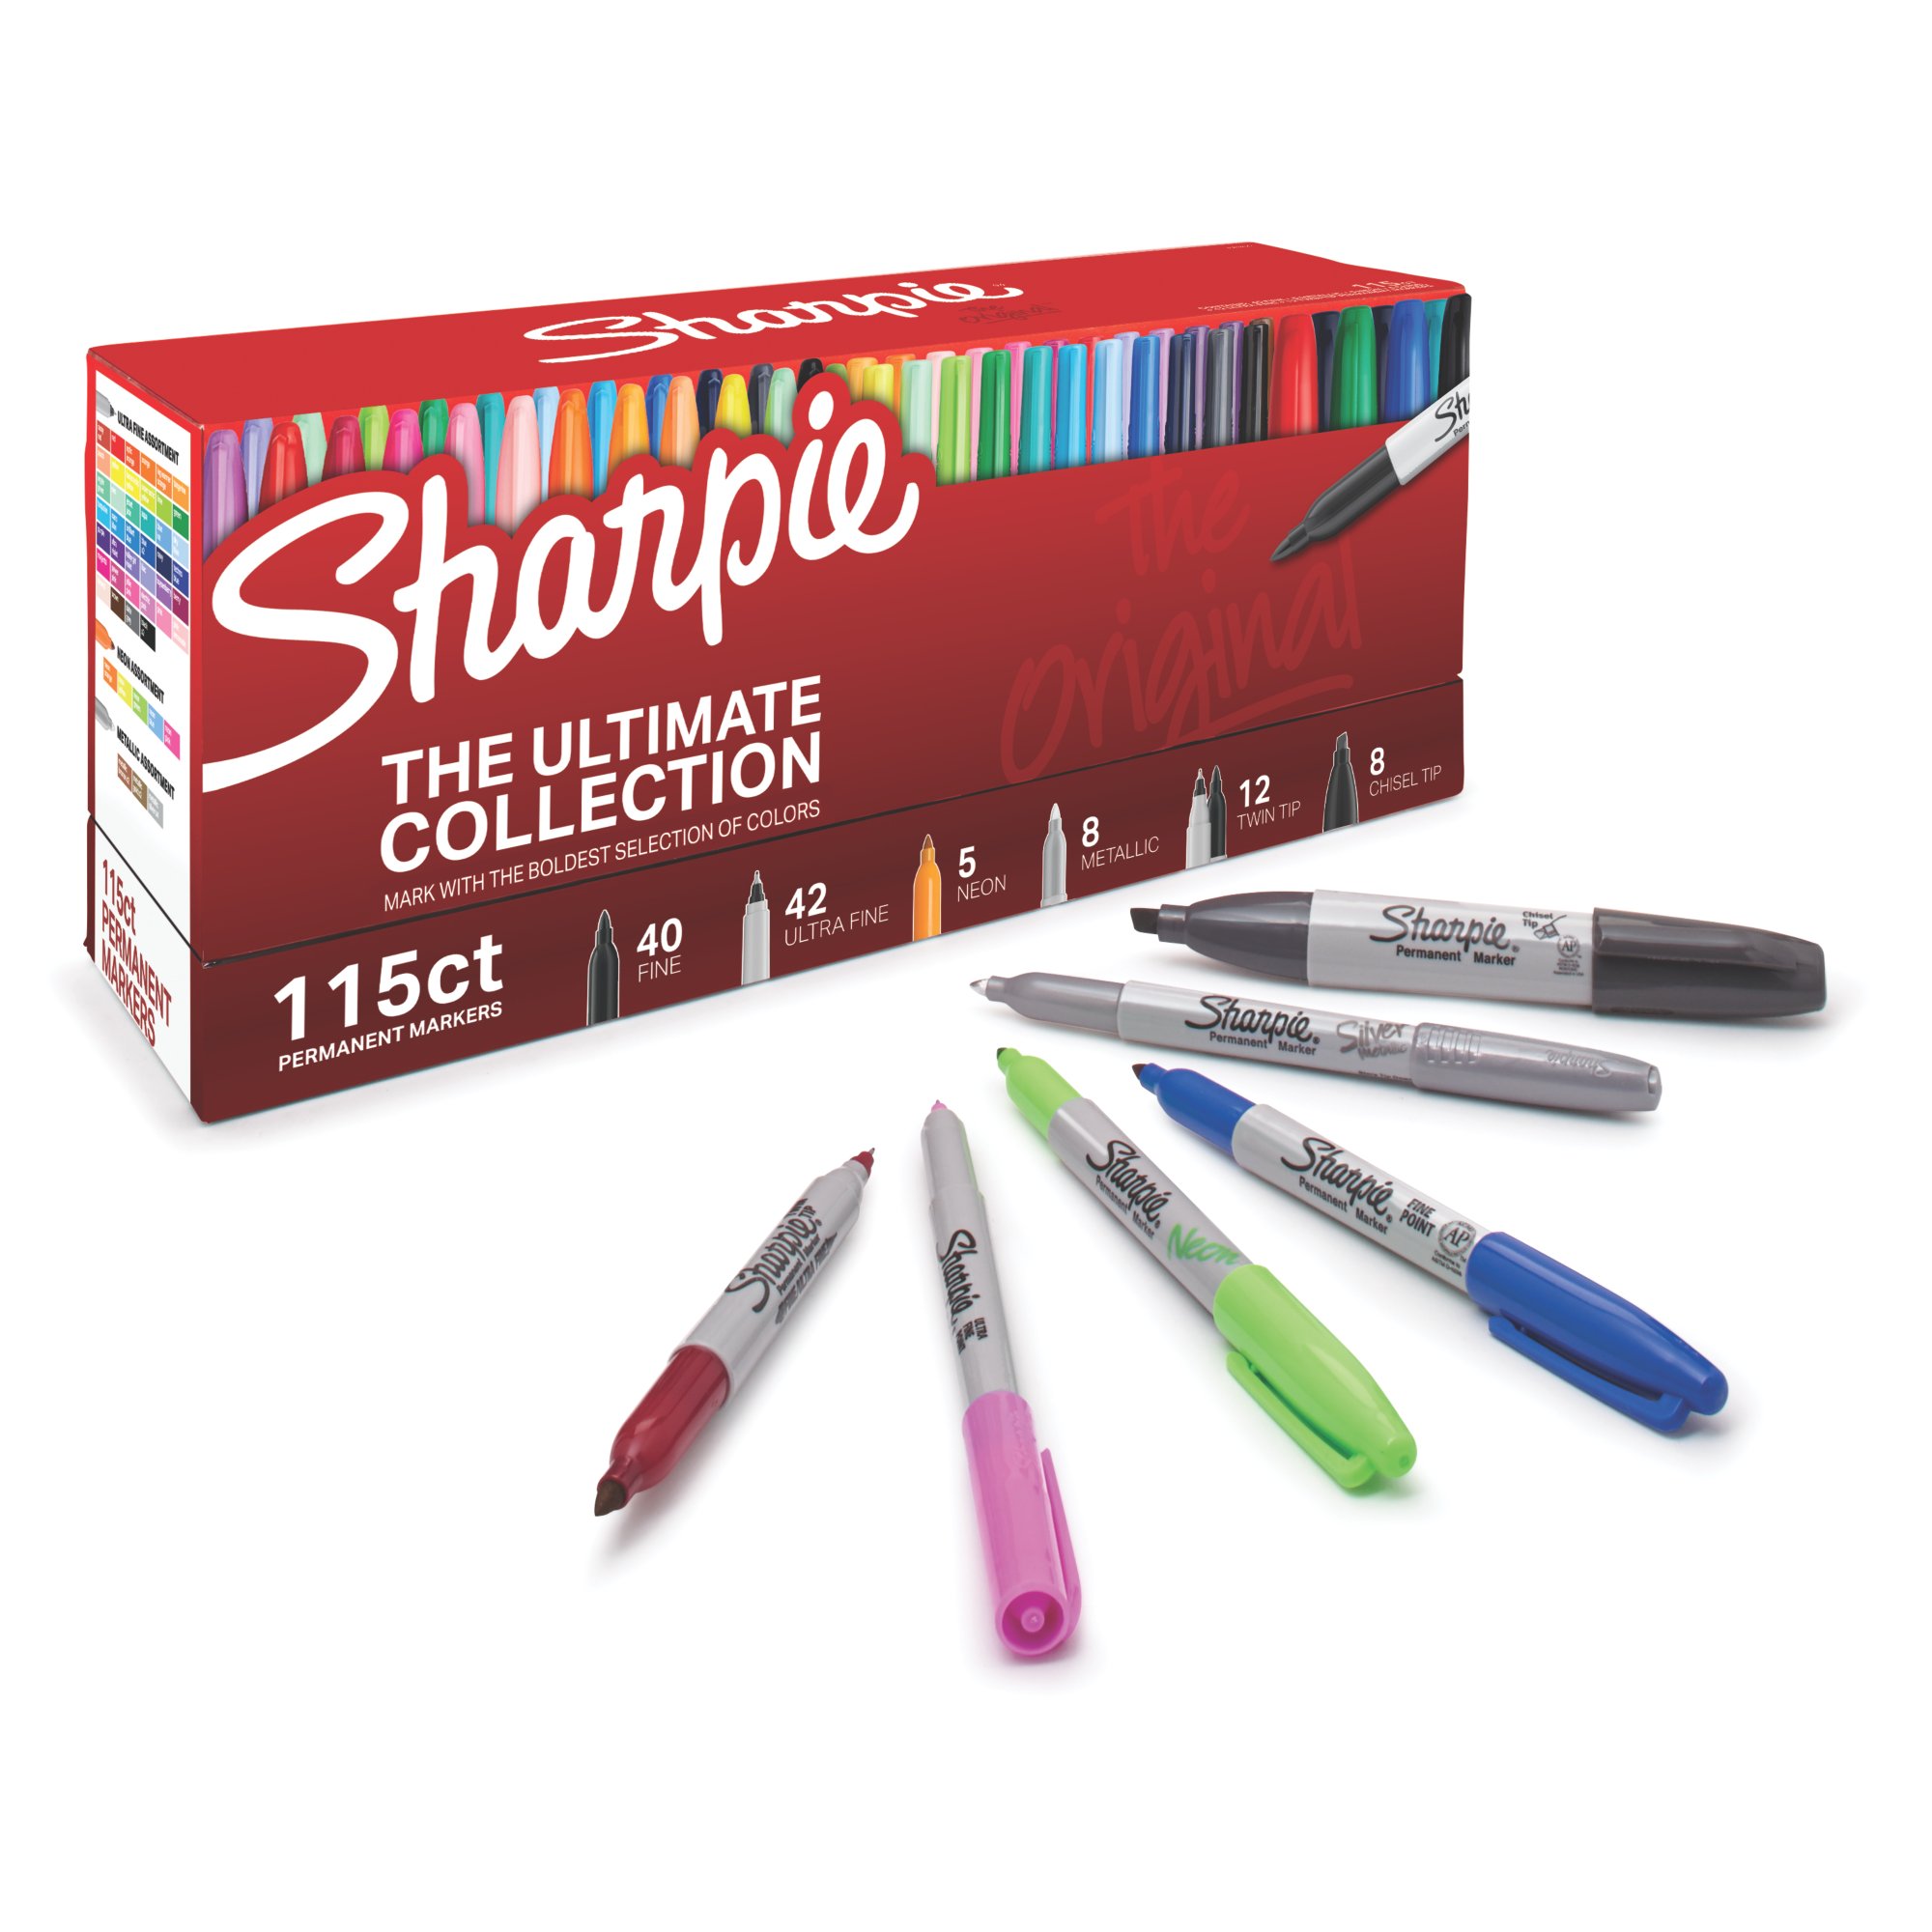 https://s7d9.scene7.com/is/image/NewellRubbermaid/1983255-sharpie-writing-115ct-out-of-pack-closed-box-beauty-2-2?wid=2000&hei=2000